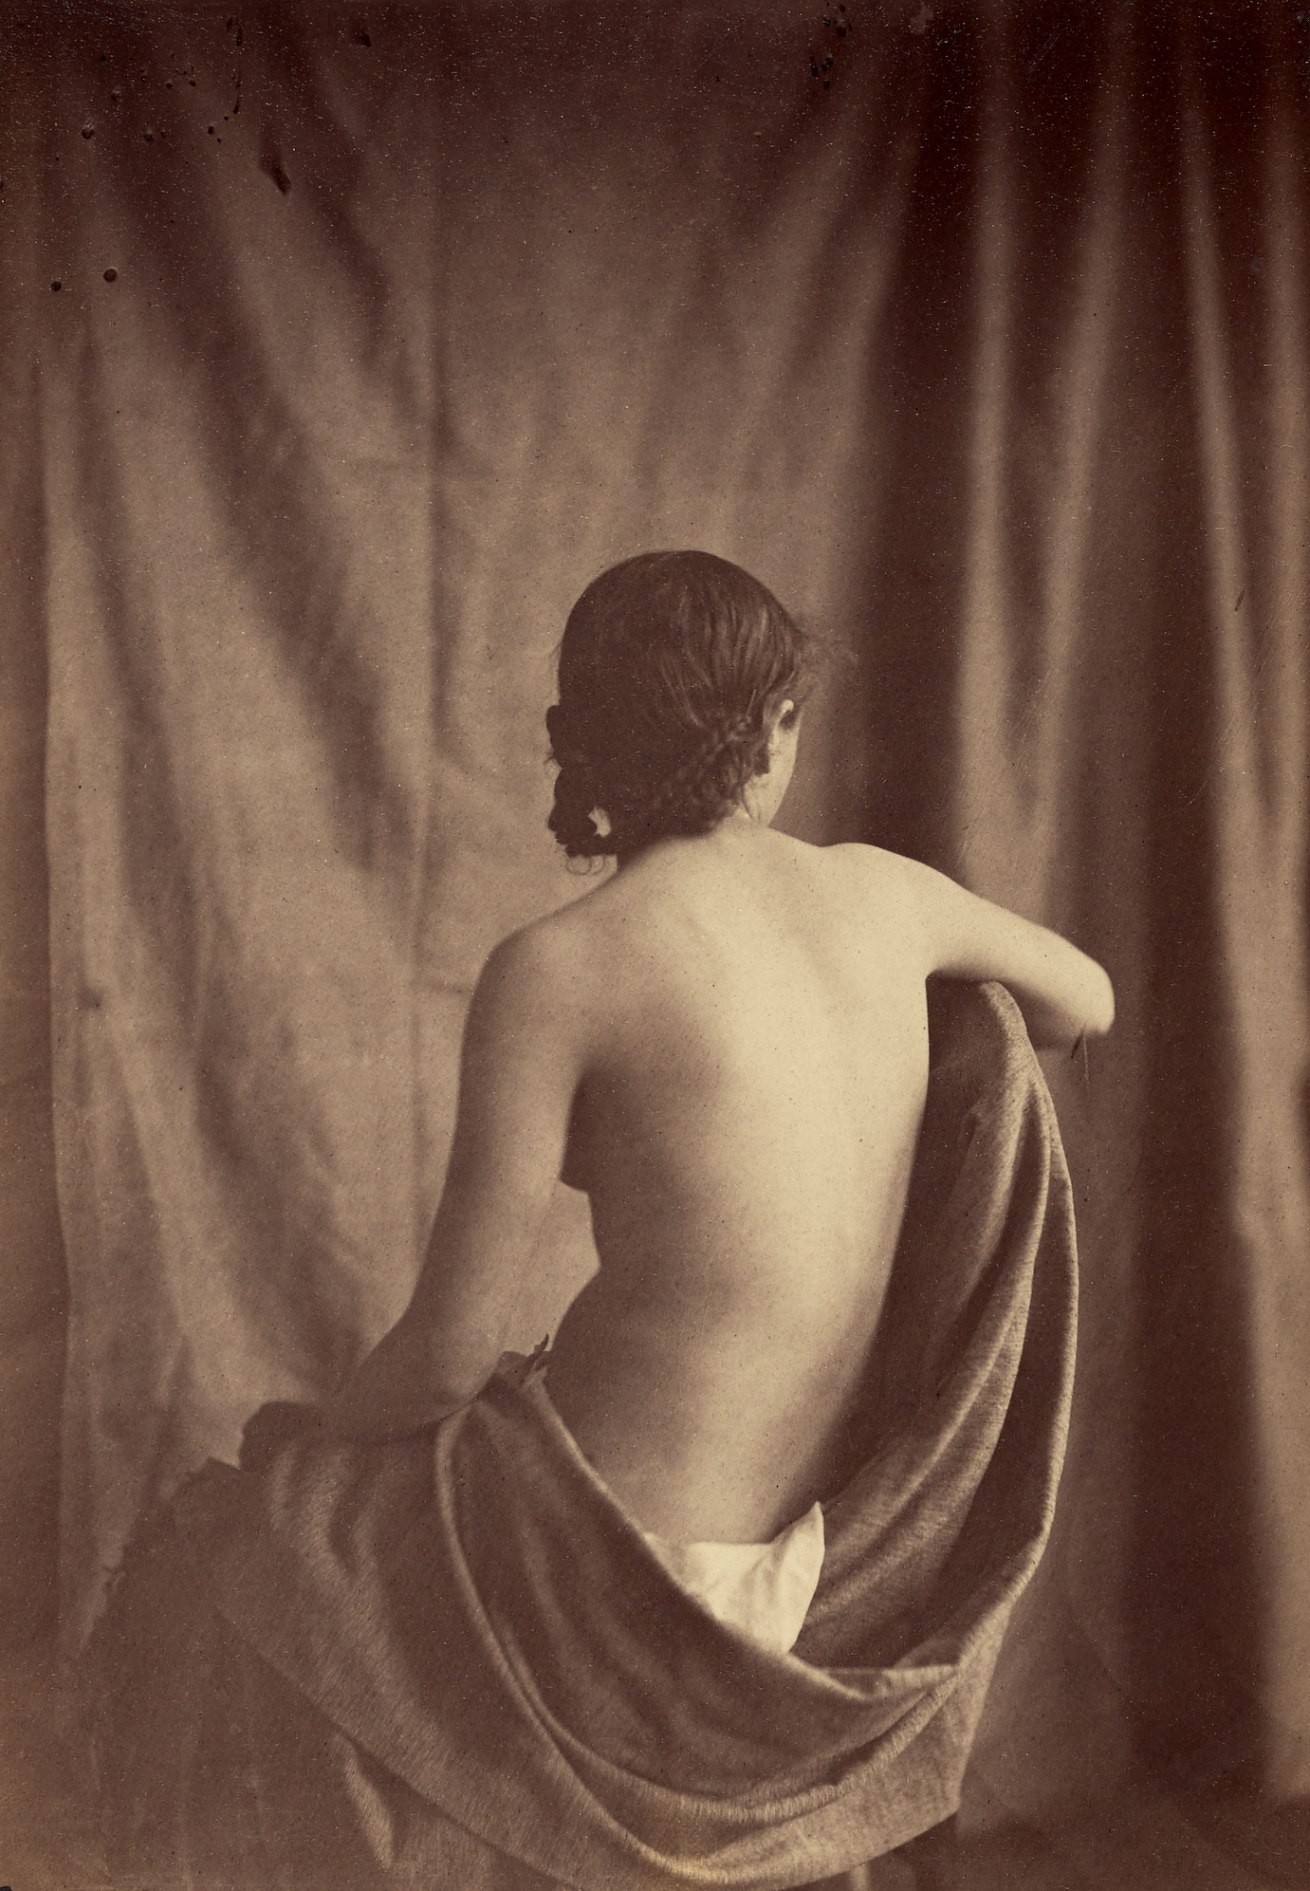 Fotó: Jean-Louis-Marie-Eugène Durieu (French, 1800-1874)<br />Possibly with Eugène Delacroix (French, 1798-1863)<br />Draped Model<br />c. 1854<br />Albumen silver print<br />Image: 18.6 x 13 cm (7 5/16 x 5 1/8 in.)<br />The J. Paul Getty Museum, Los Angeles